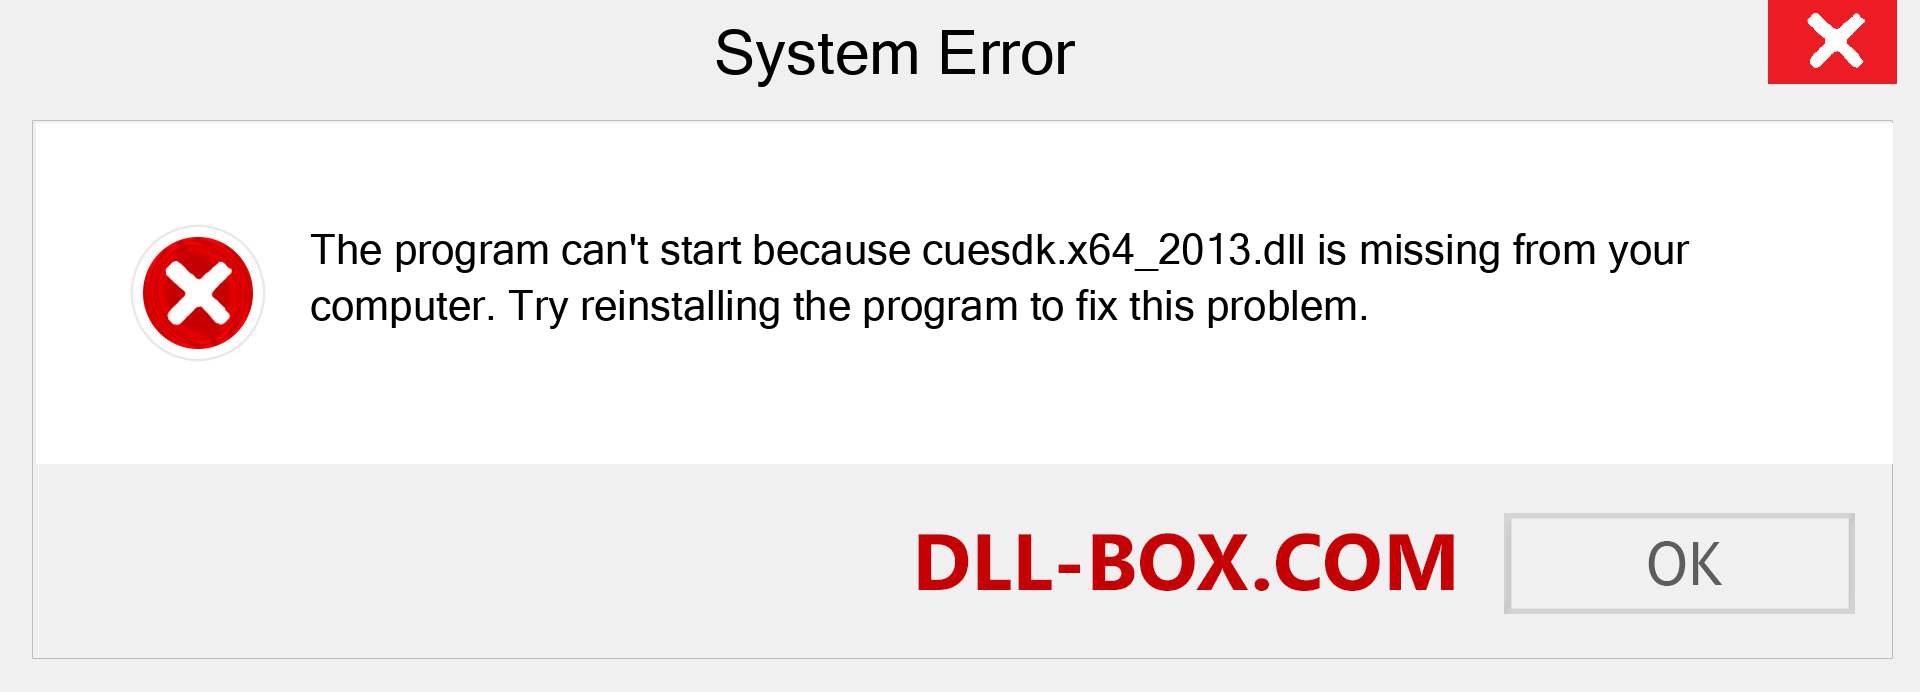  cuesdk.x64_2013.dll file is missing?. Download for Windows 7, 8, 10 - Fix  cuesdk.x64_2013 dll Missing Error on Windows, photos, images